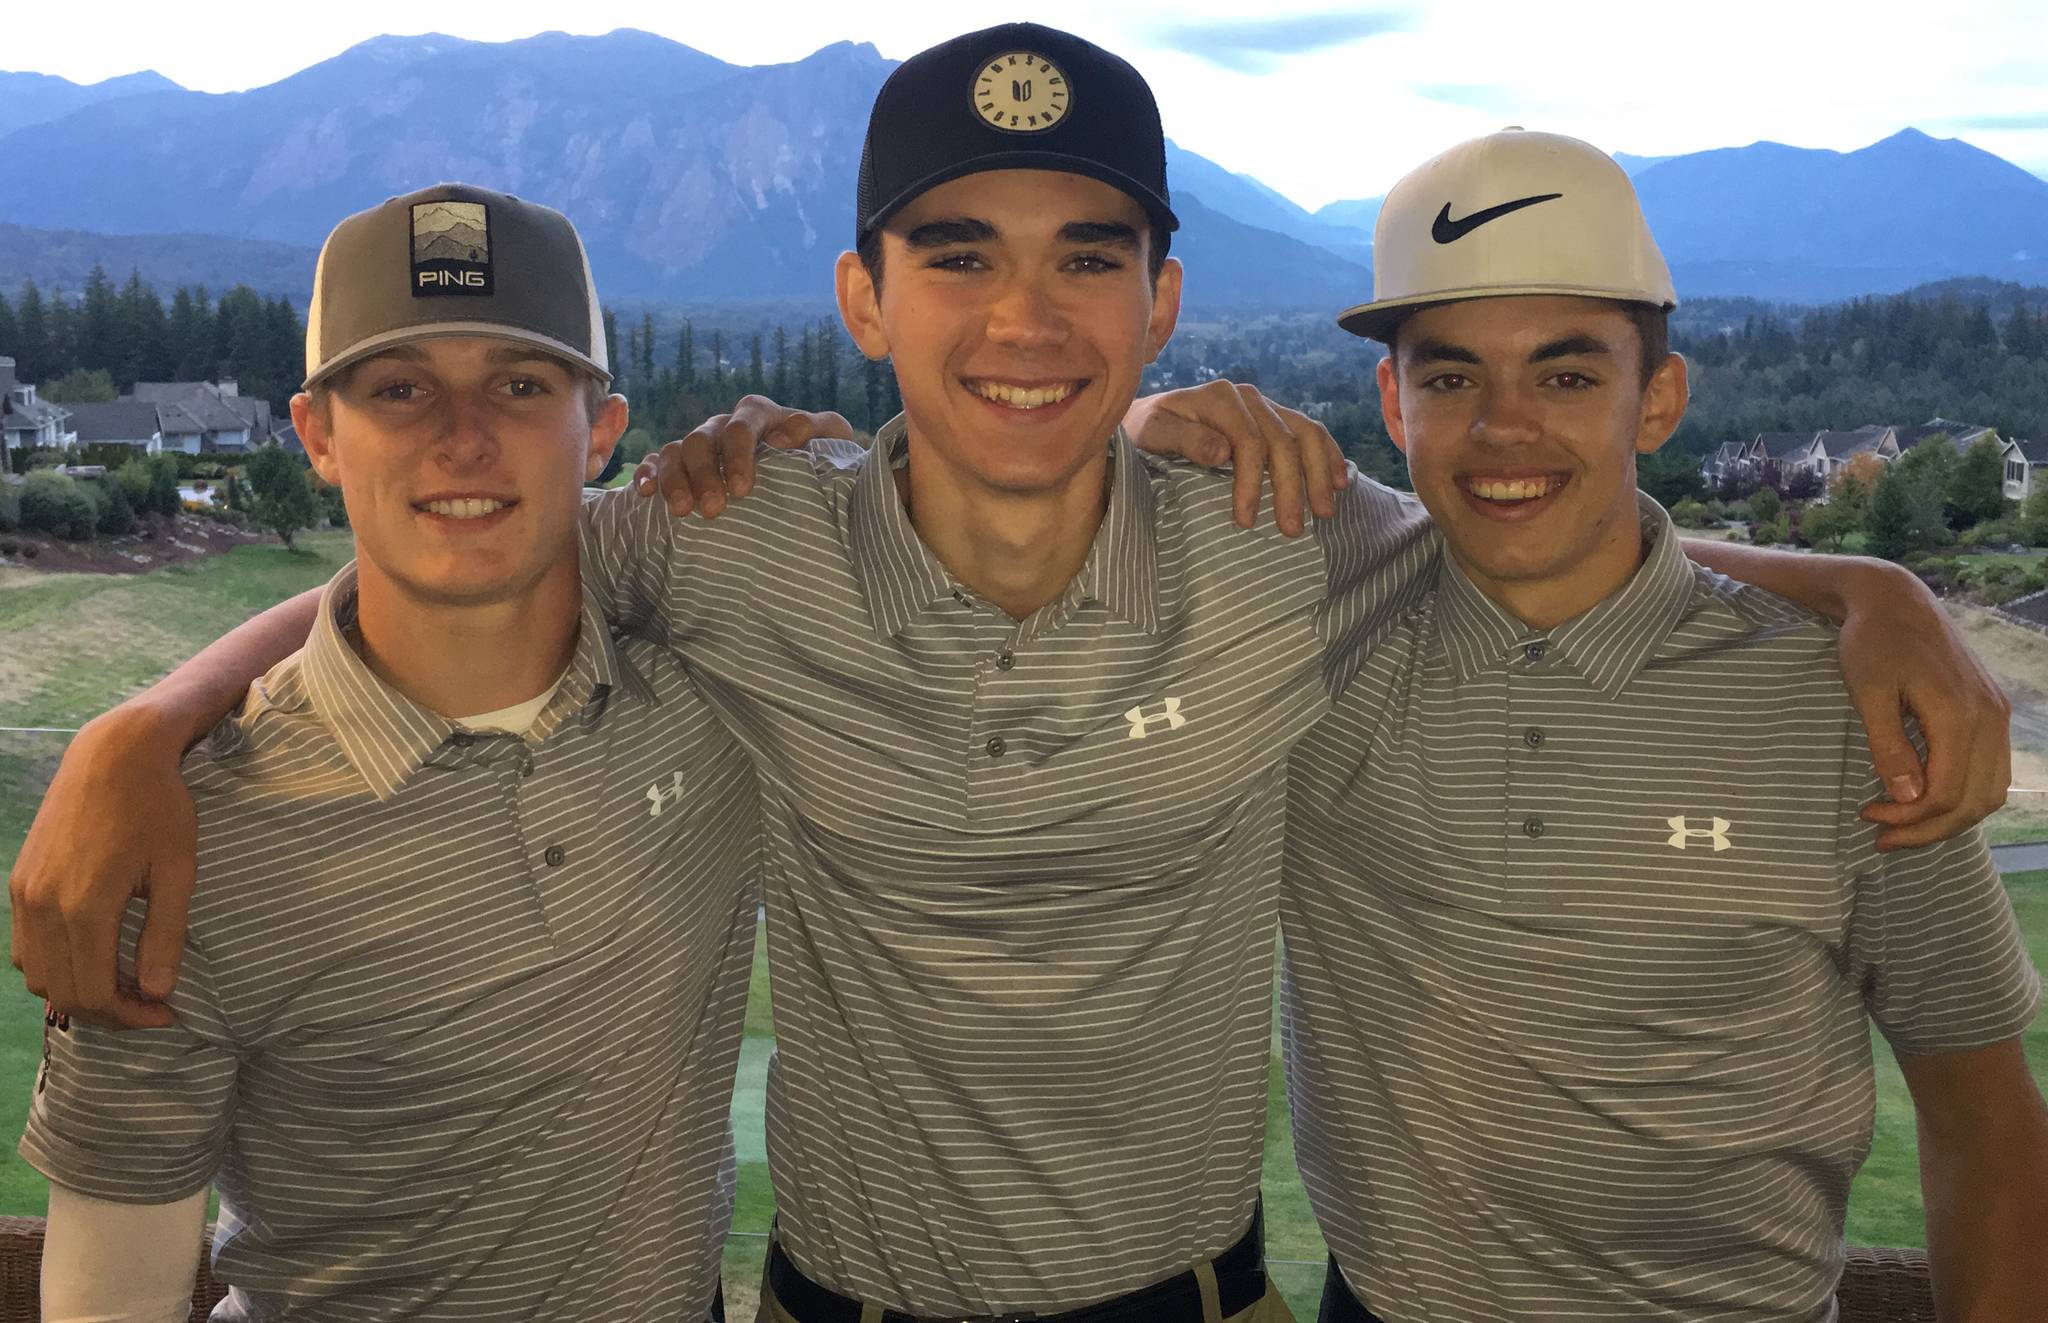 Mount Si’s team captains, from left, senior Cole Bostwick, senior Jack Murphy and junior Nate Harris. Courtesy of Robert Bostwick